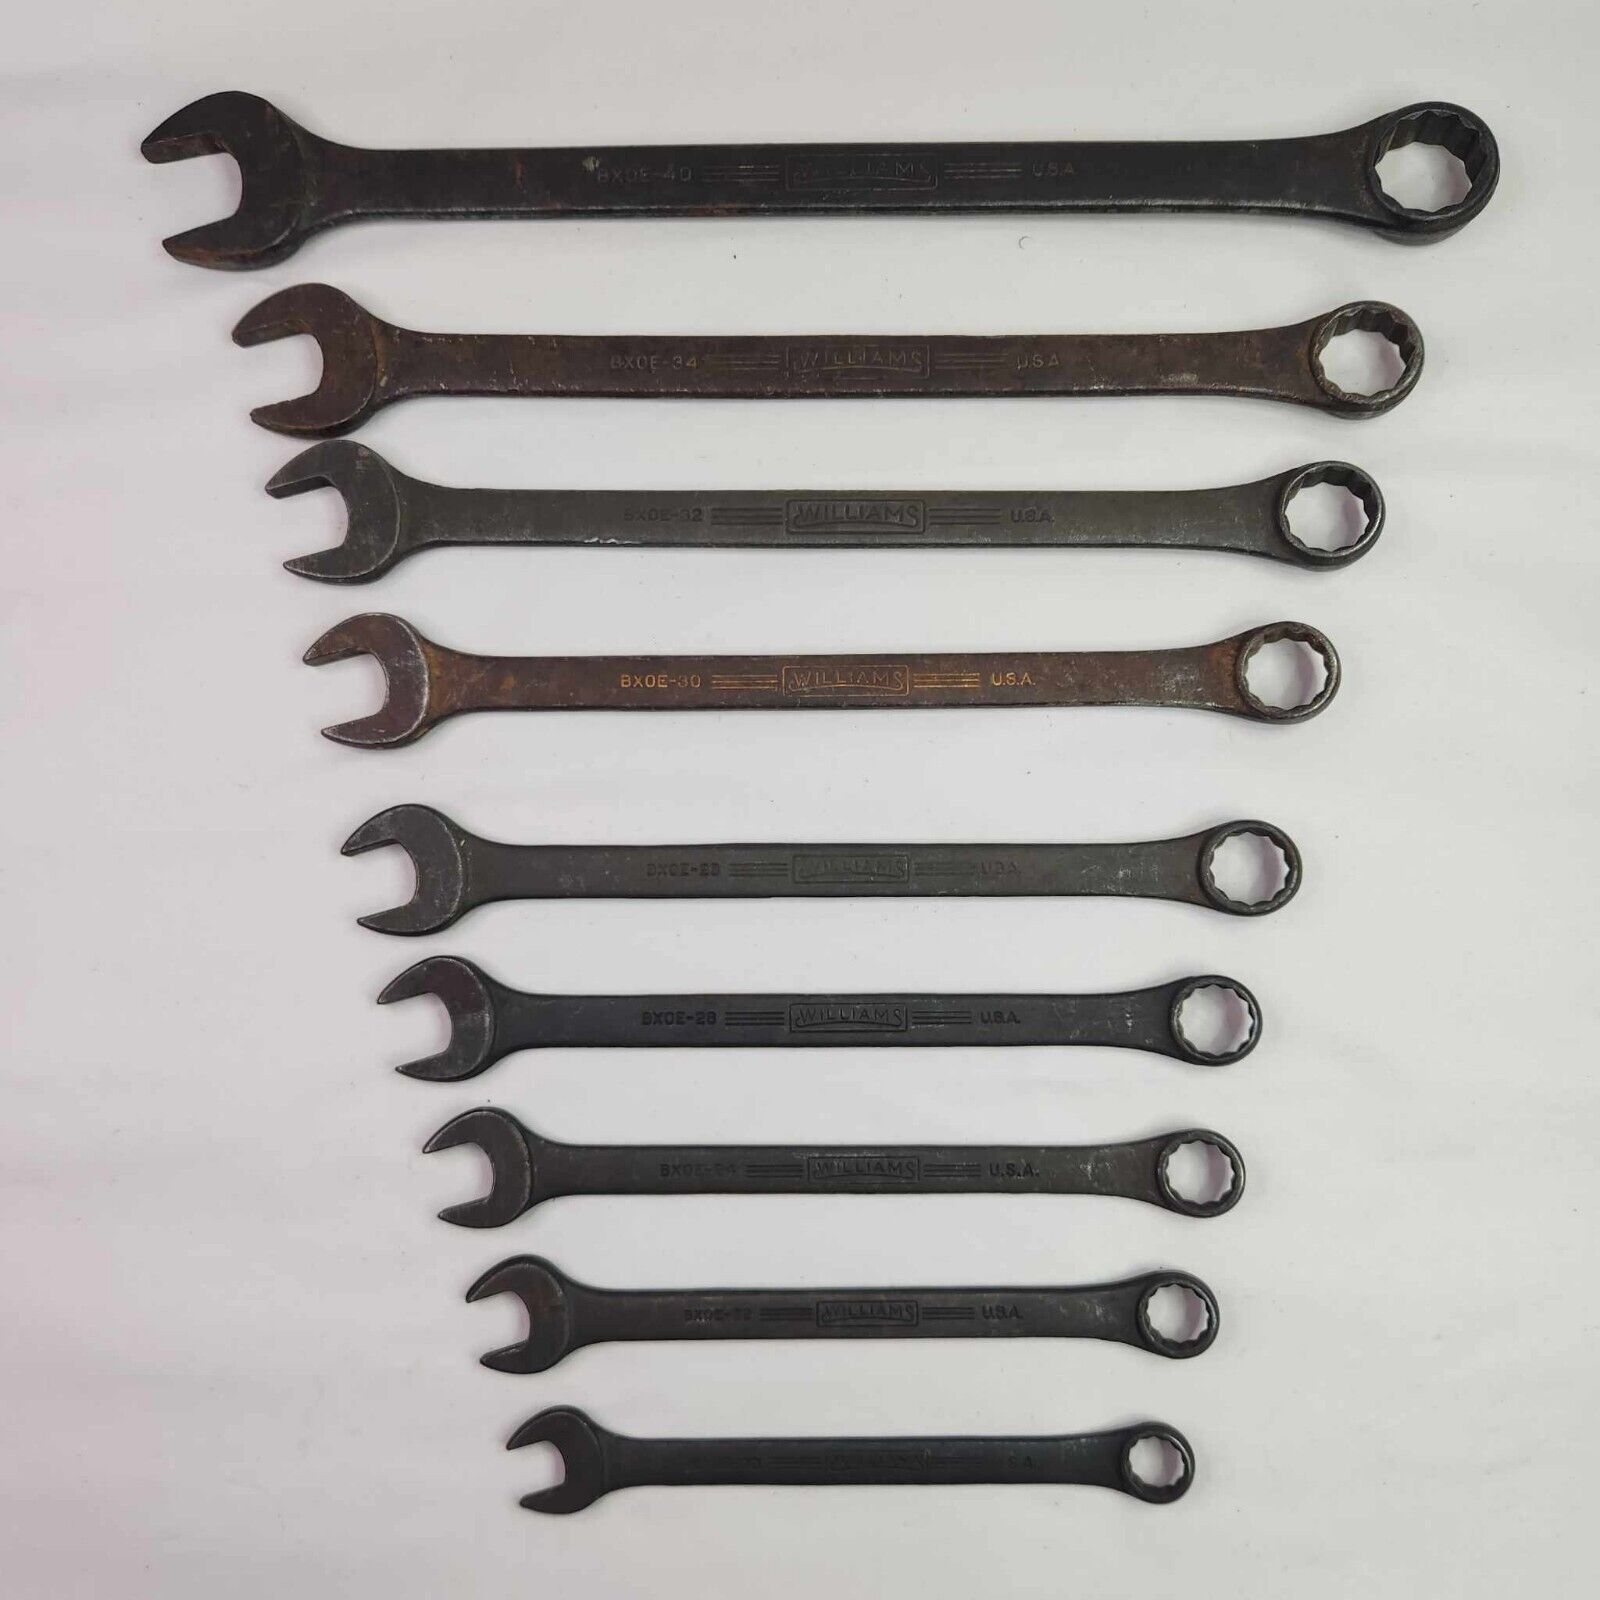 (9) J.H Williams USA Black Oxide Superrench Combination Wrenches 1-1/4 to 5/8